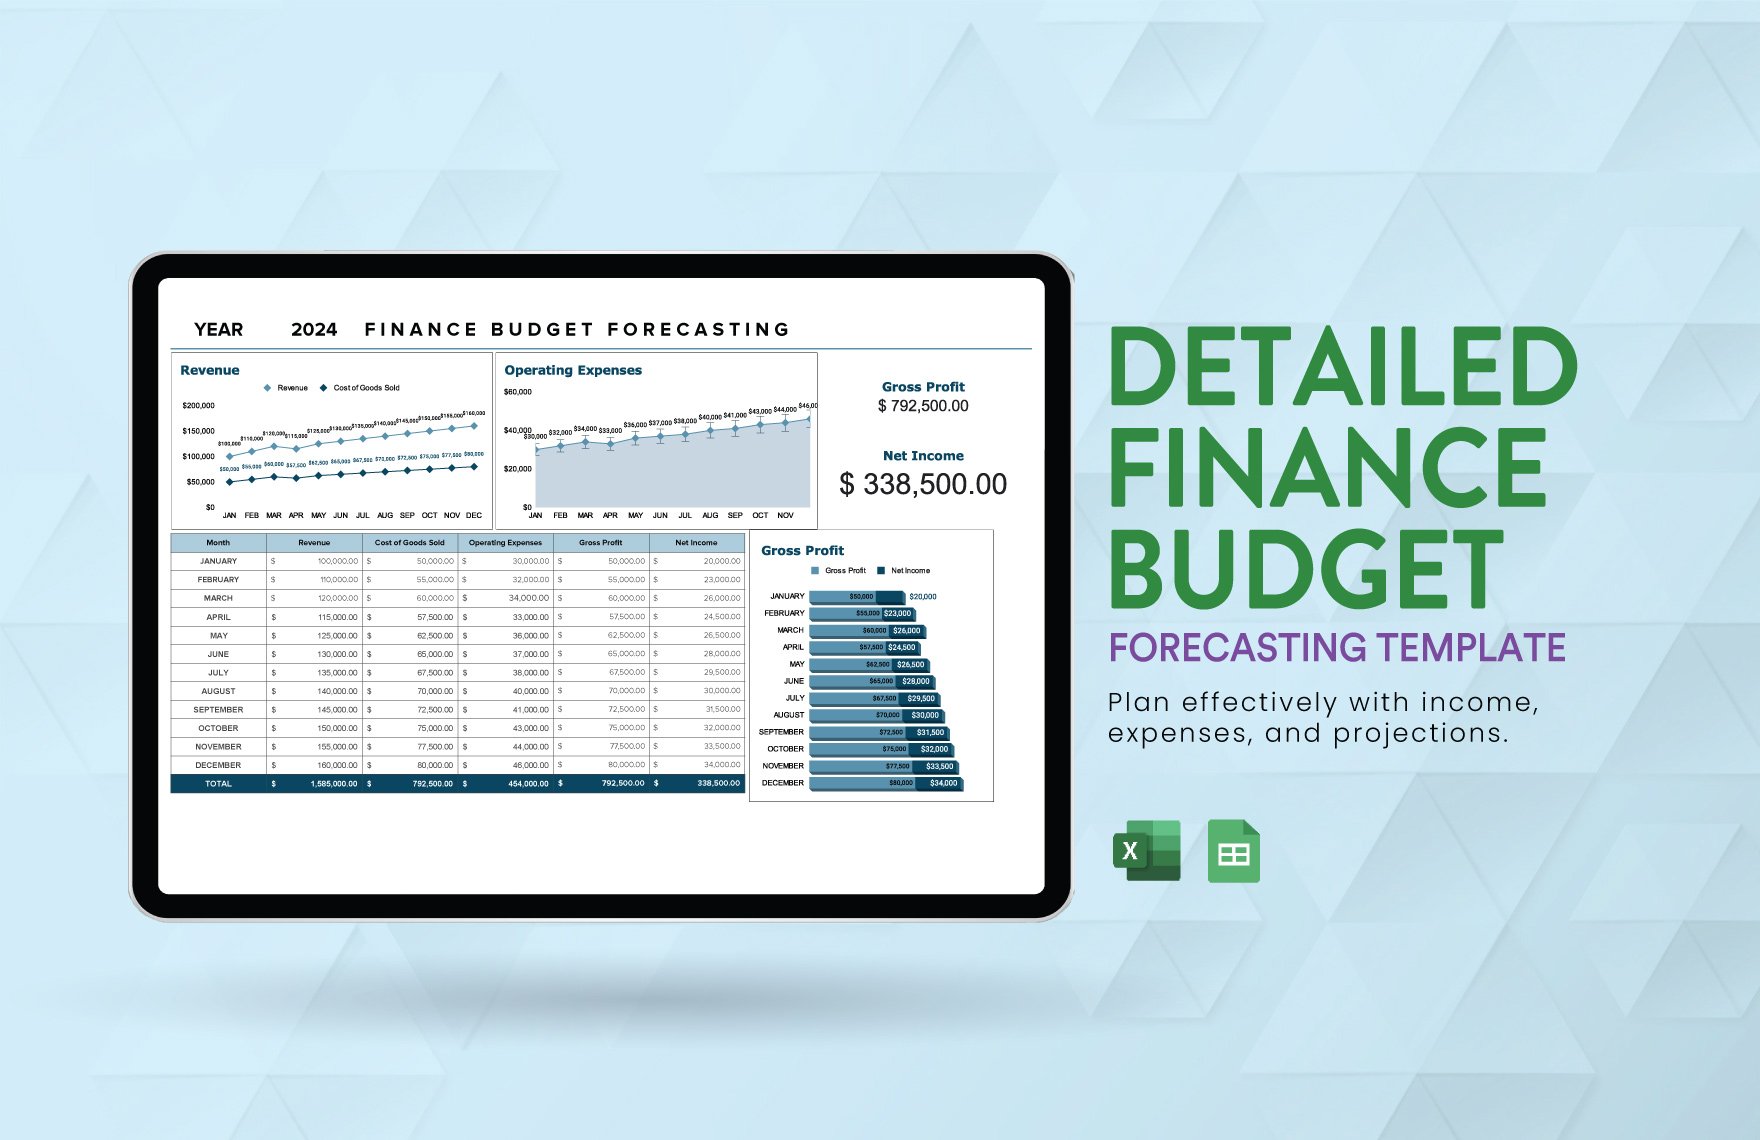 Detailed Finance Budget Forecasting Template